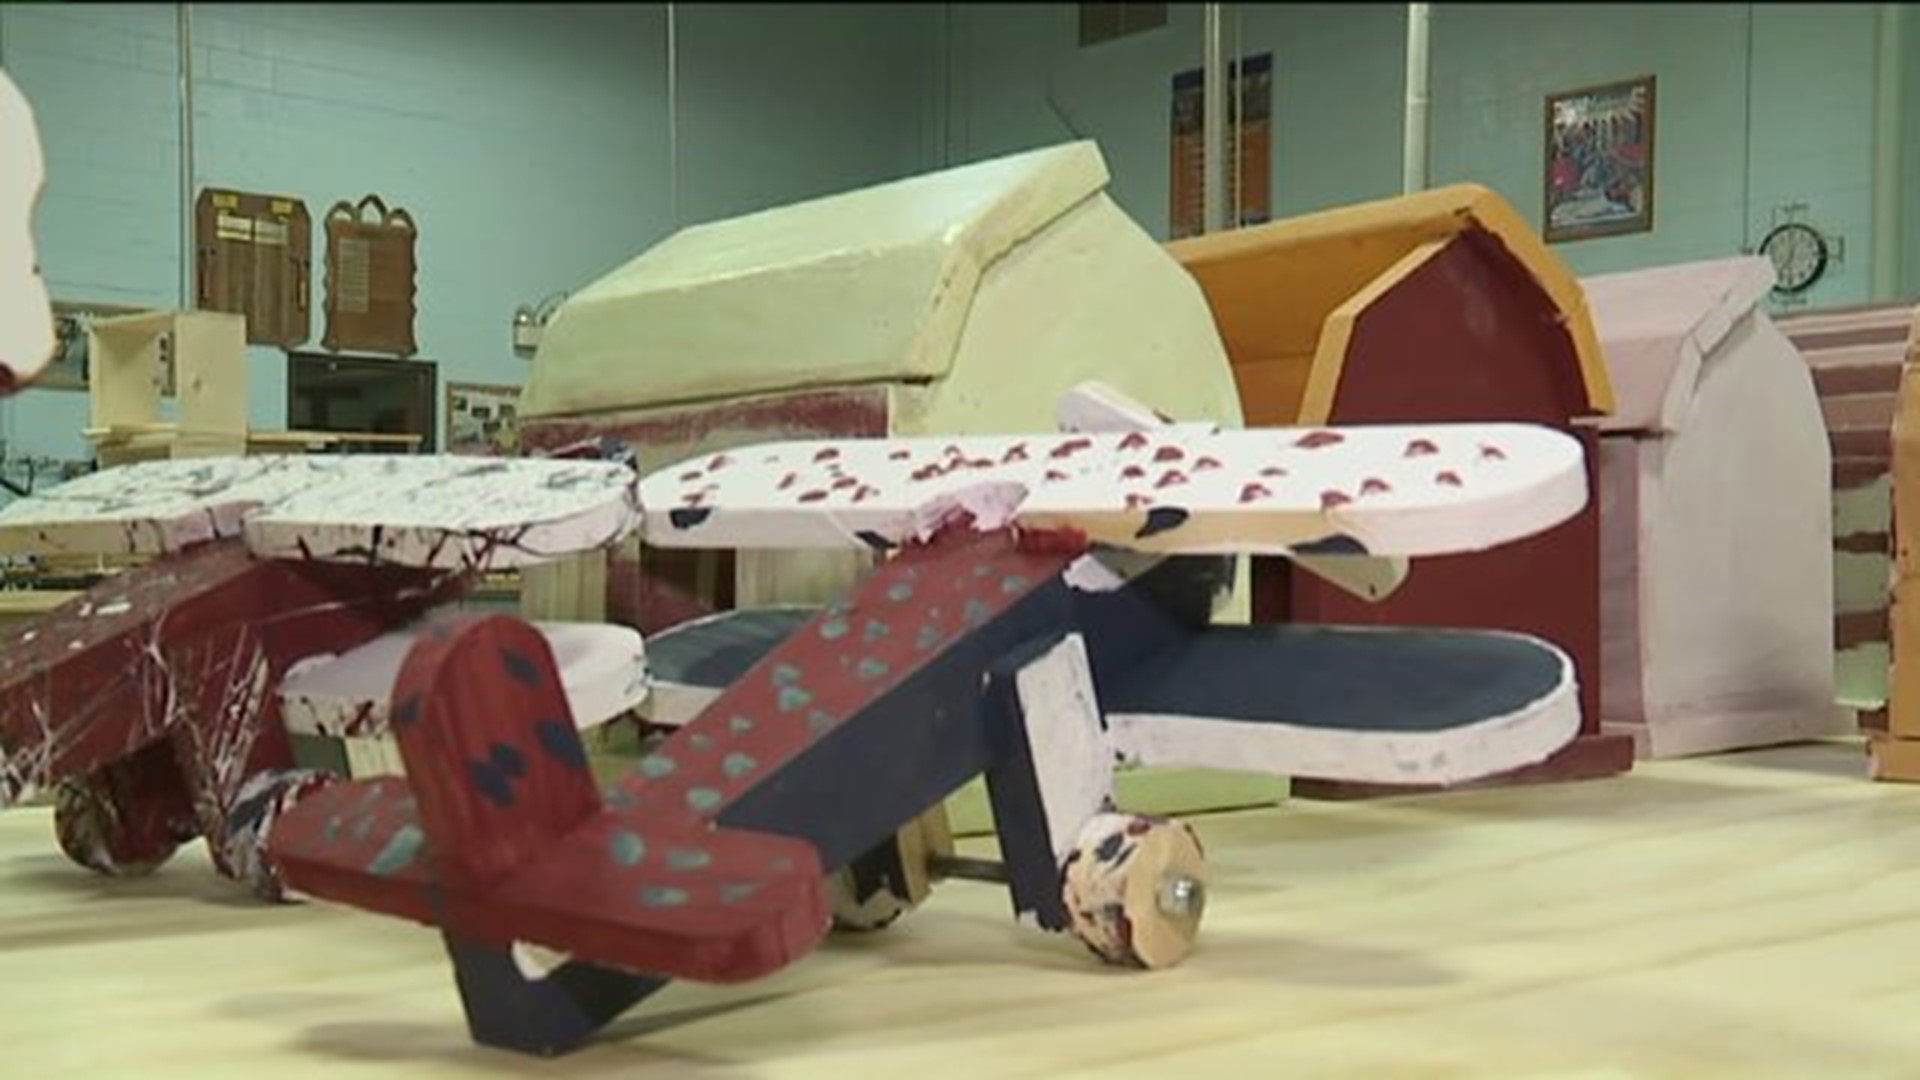 Carpentry Students Make Toys for Kids for Christmas